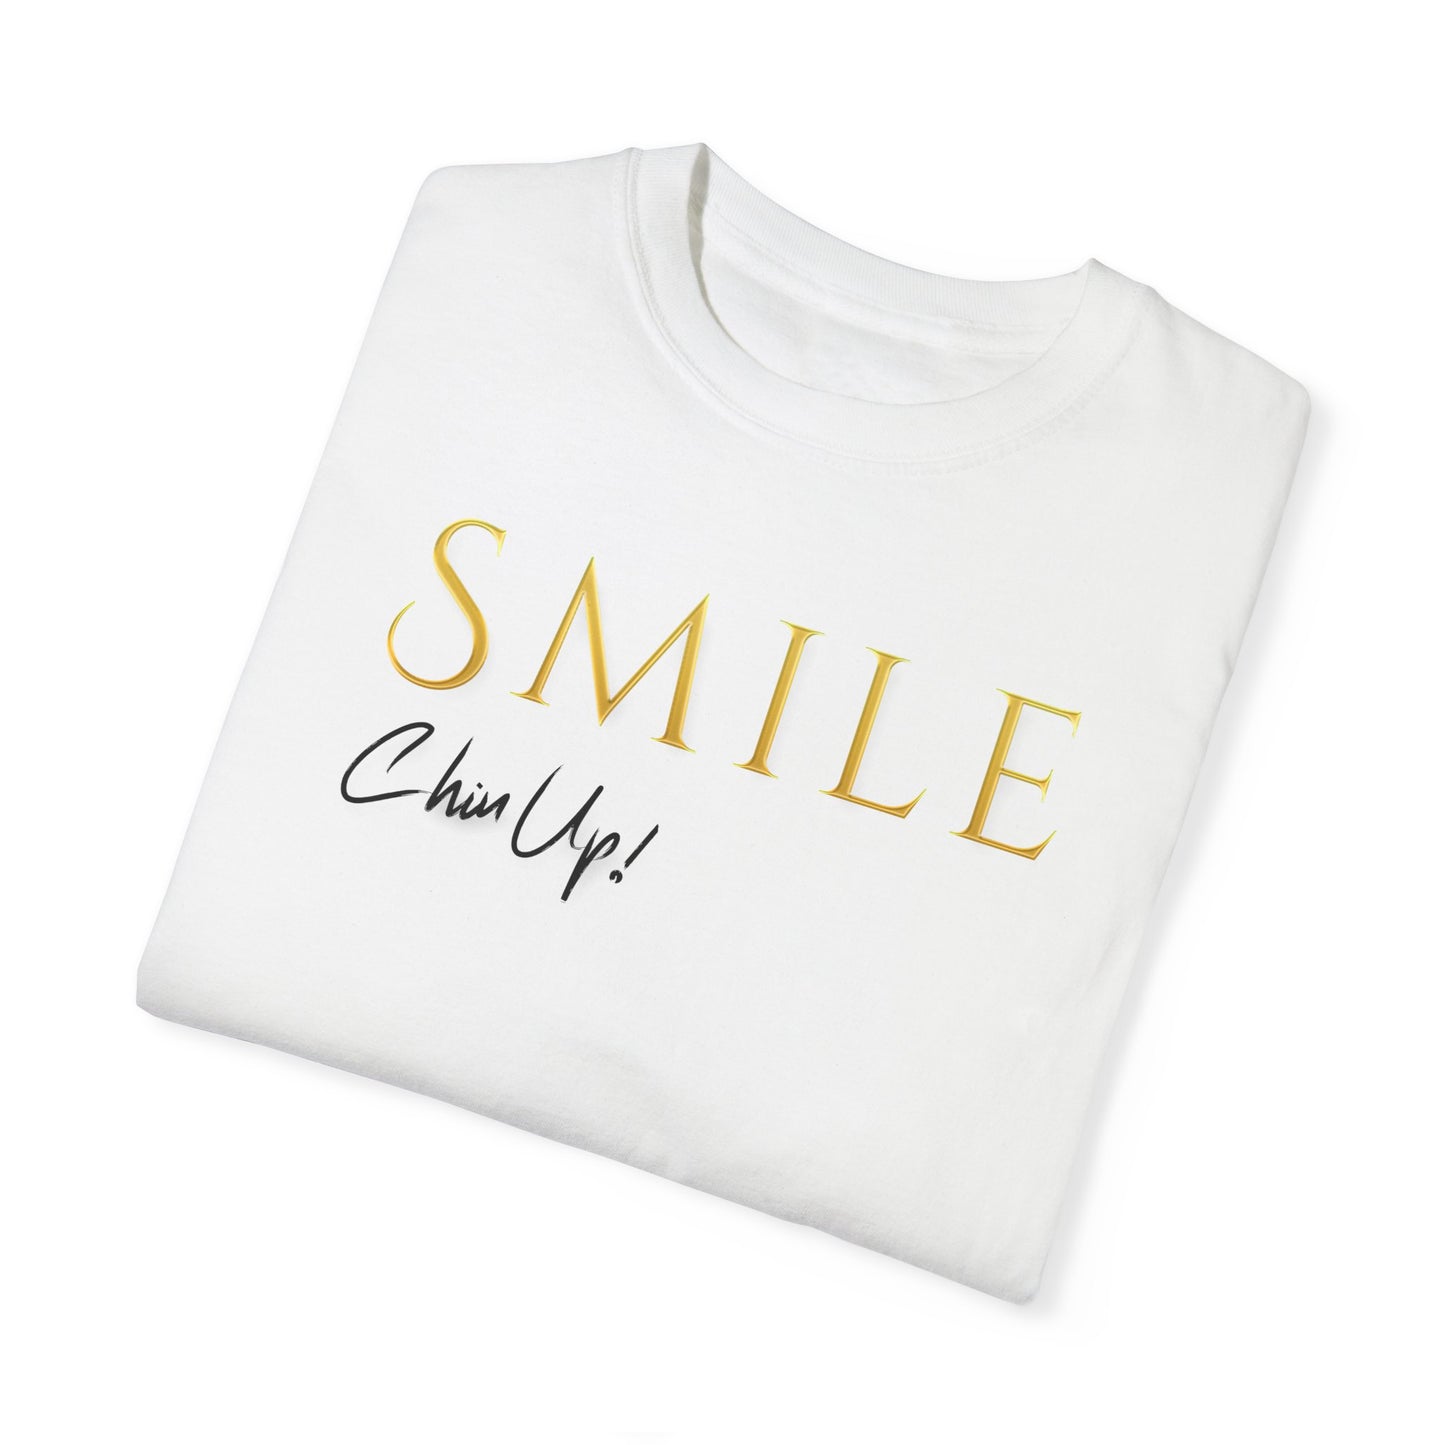 SMILE, Chin Up! Garment-Dyed T-shirt